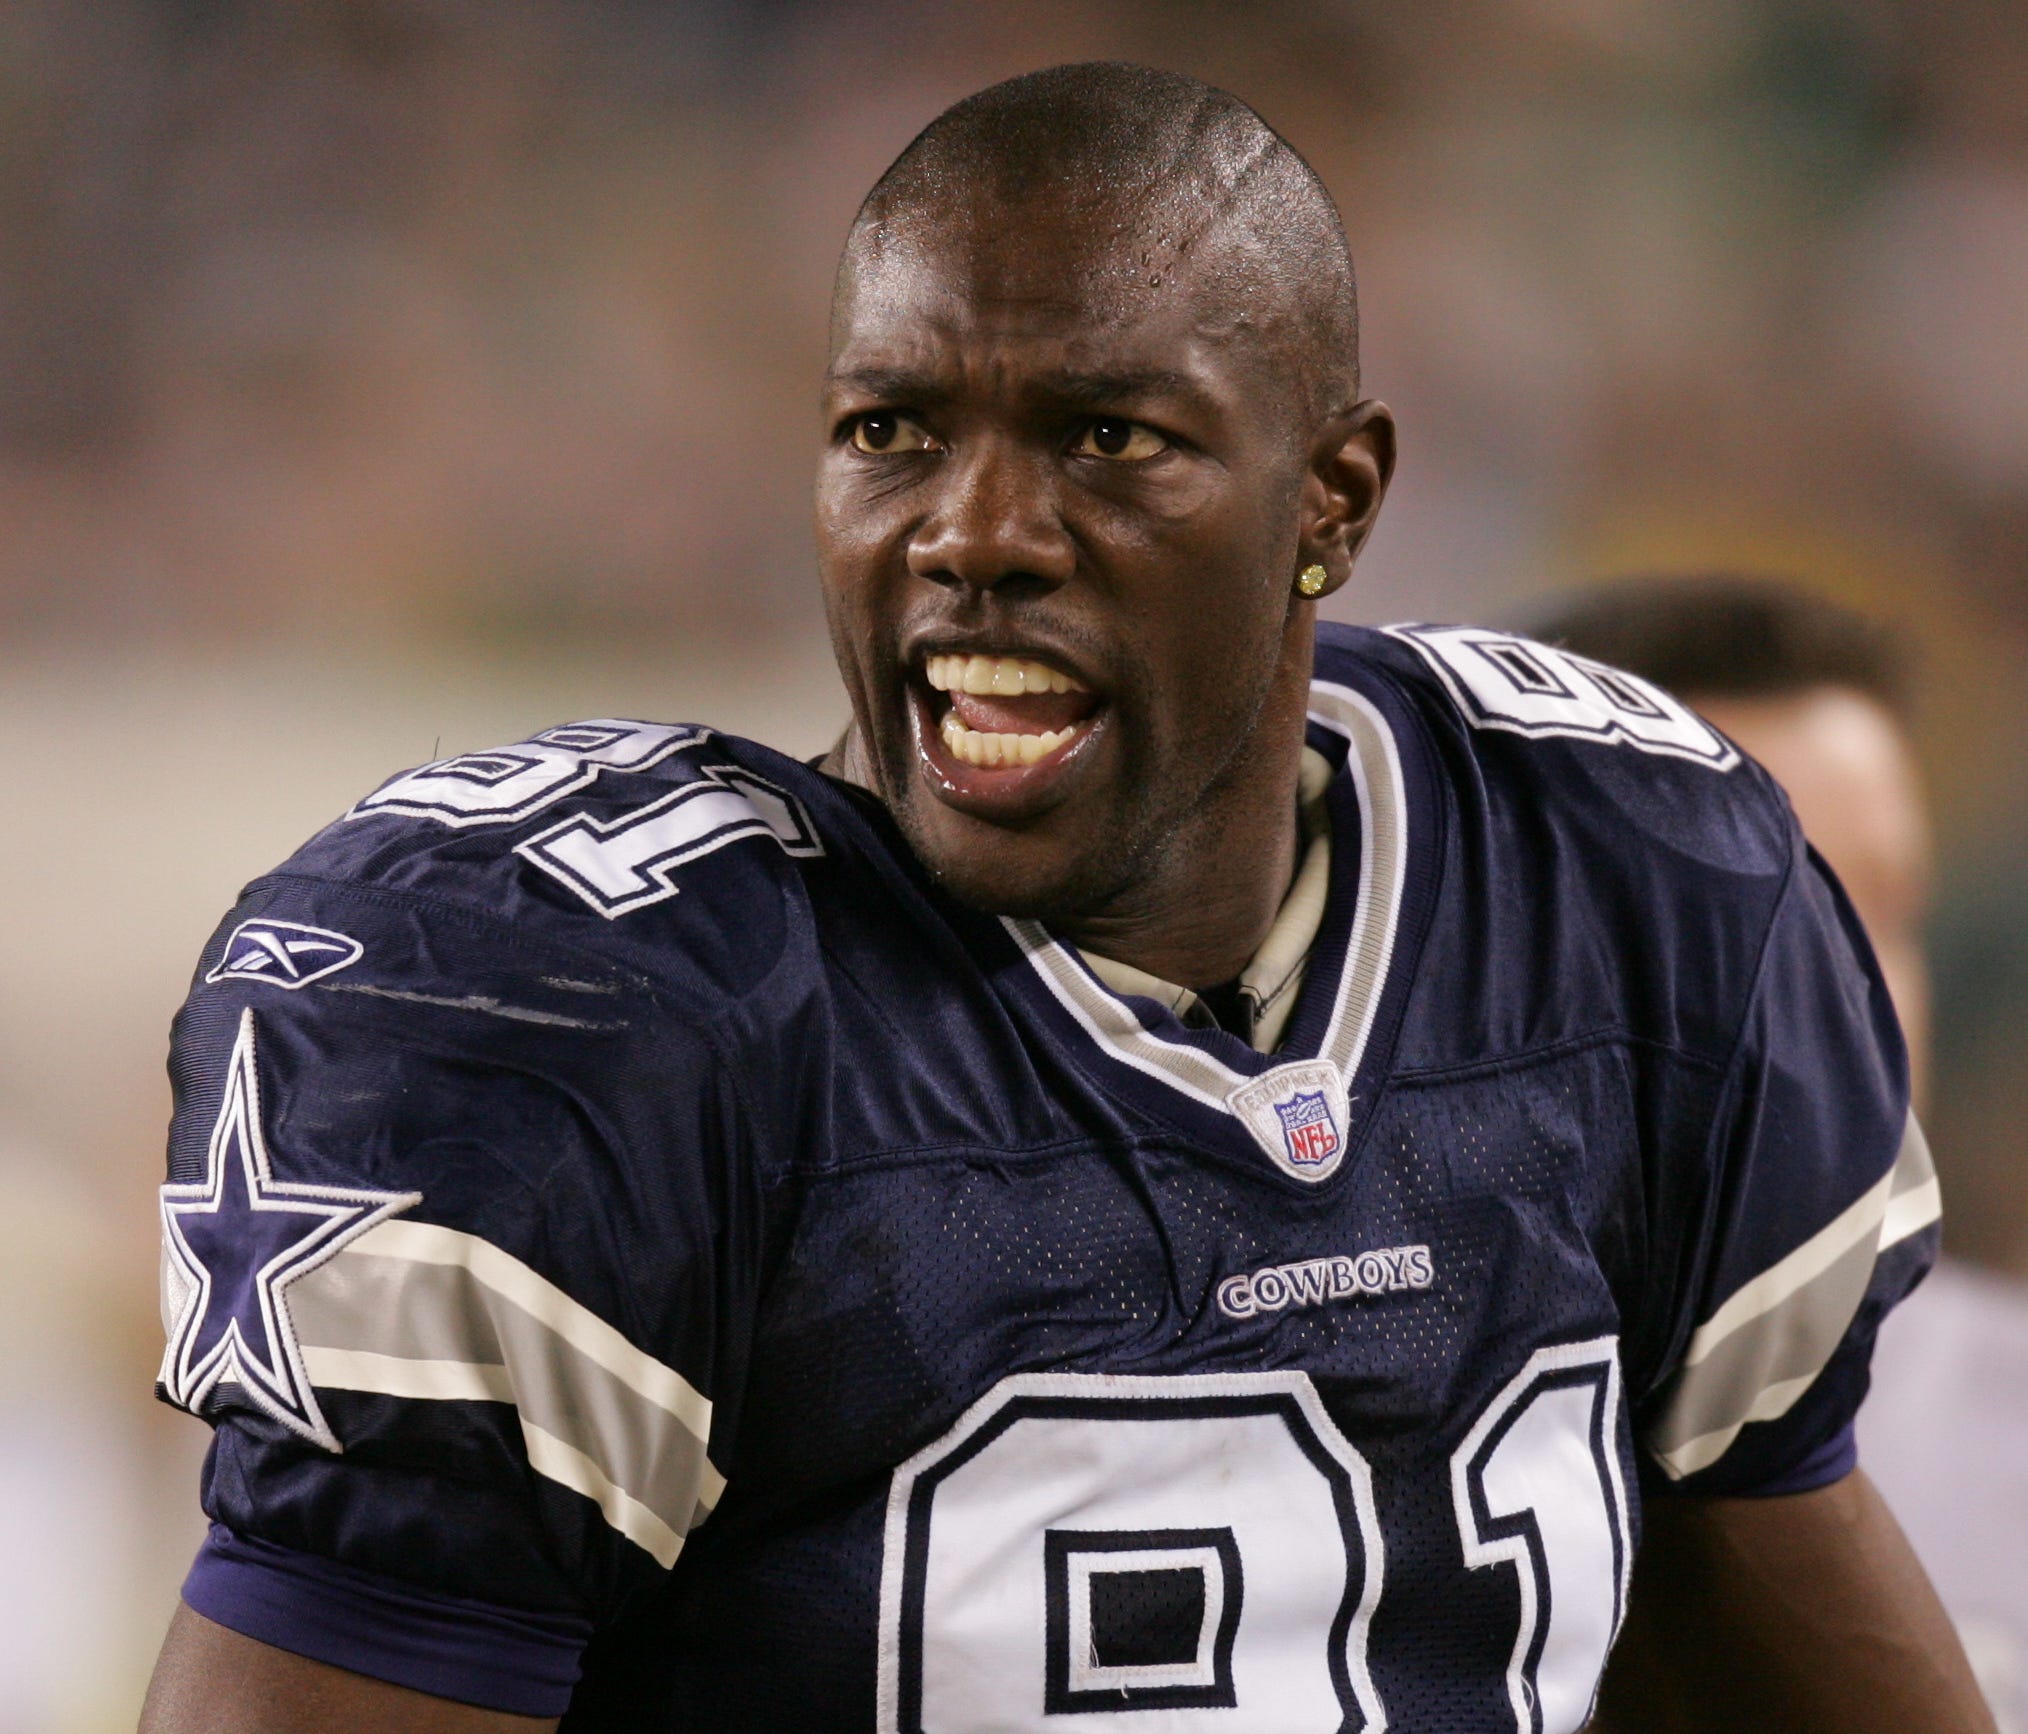 Terrell Owens mouths off on the sidelines after a pass intended for him in the fourth quarter was intercepted by the Eagles as Eagles Sunday at Lincoln Financial Field in Philadelphia, PA.